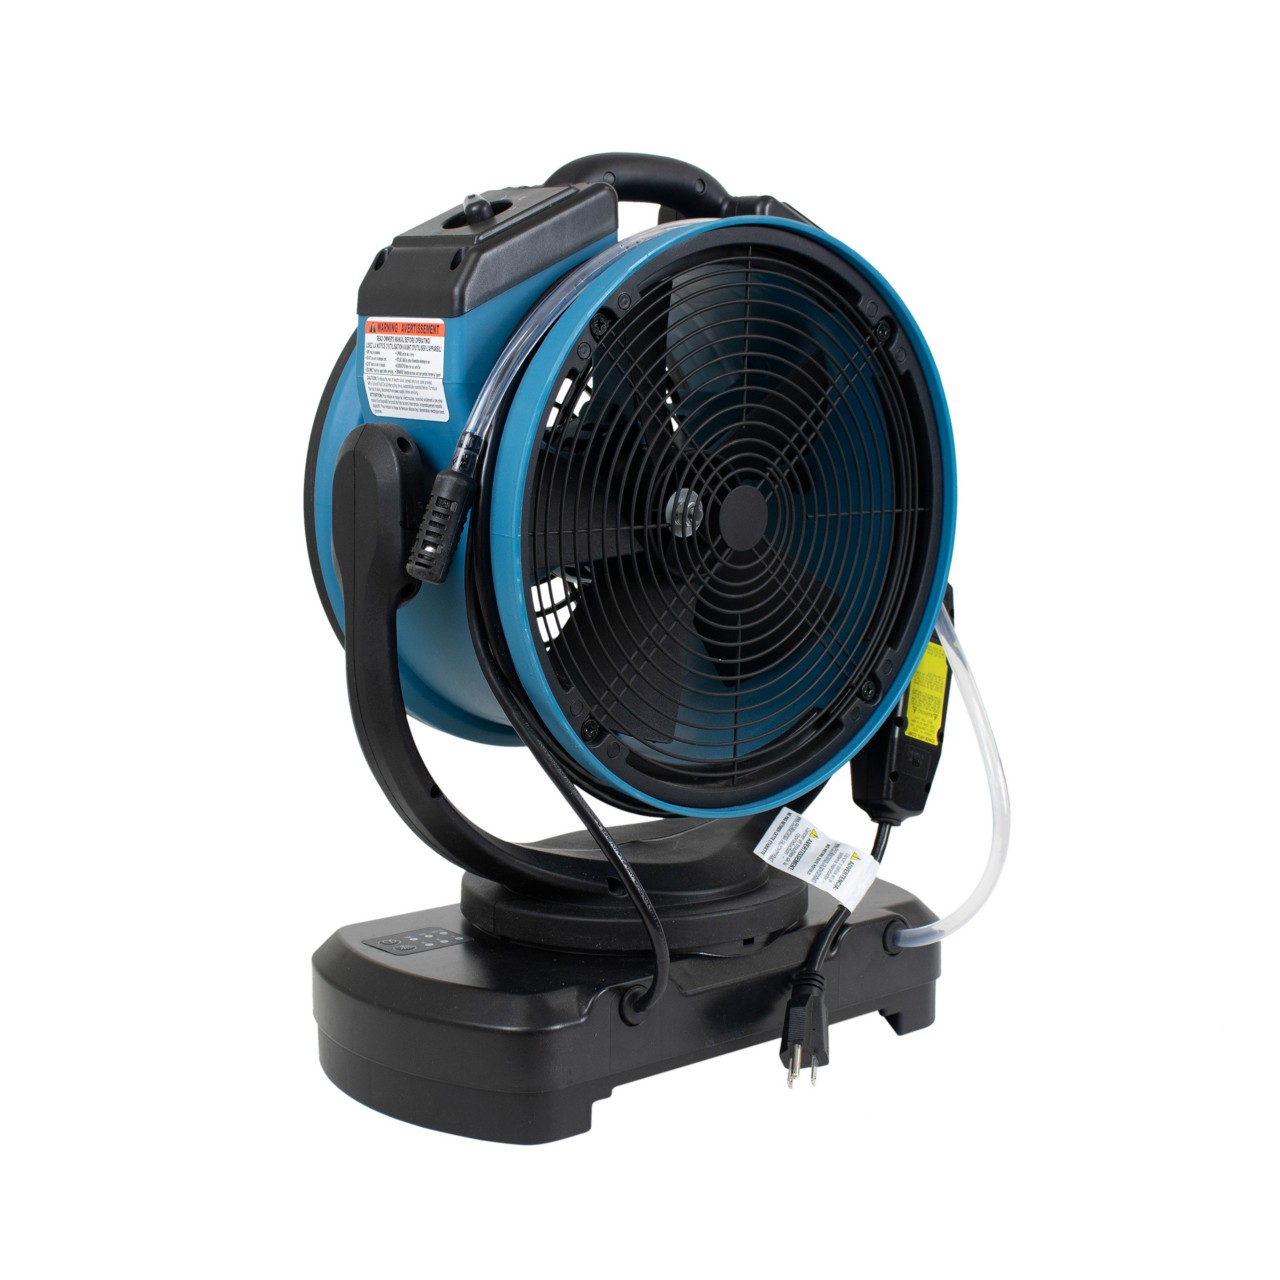 Image of XPower 5 Speed Professional Air Circulator.